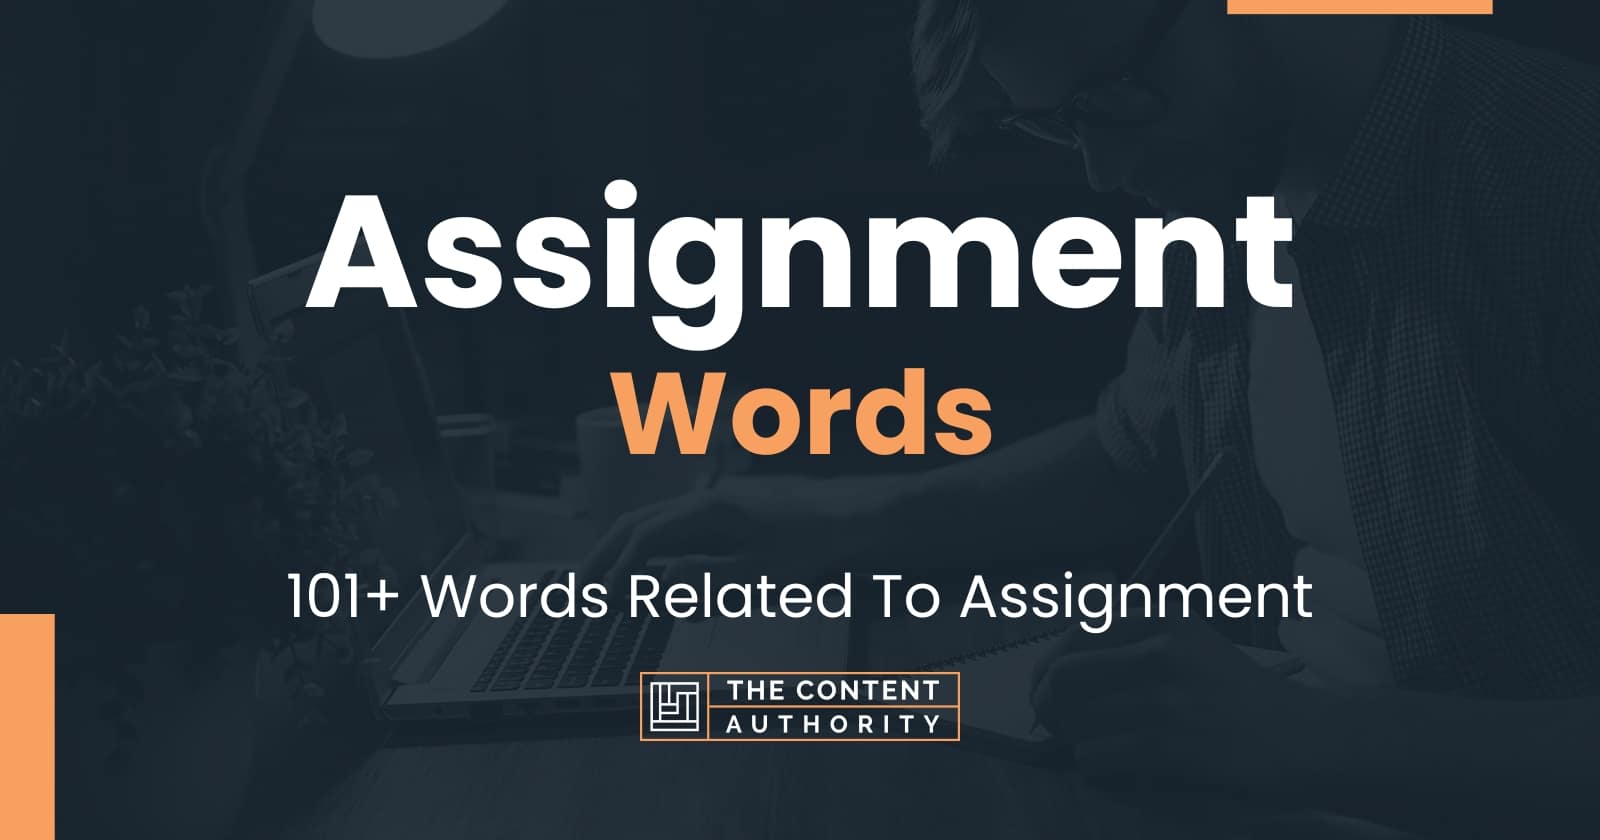 words that assignment